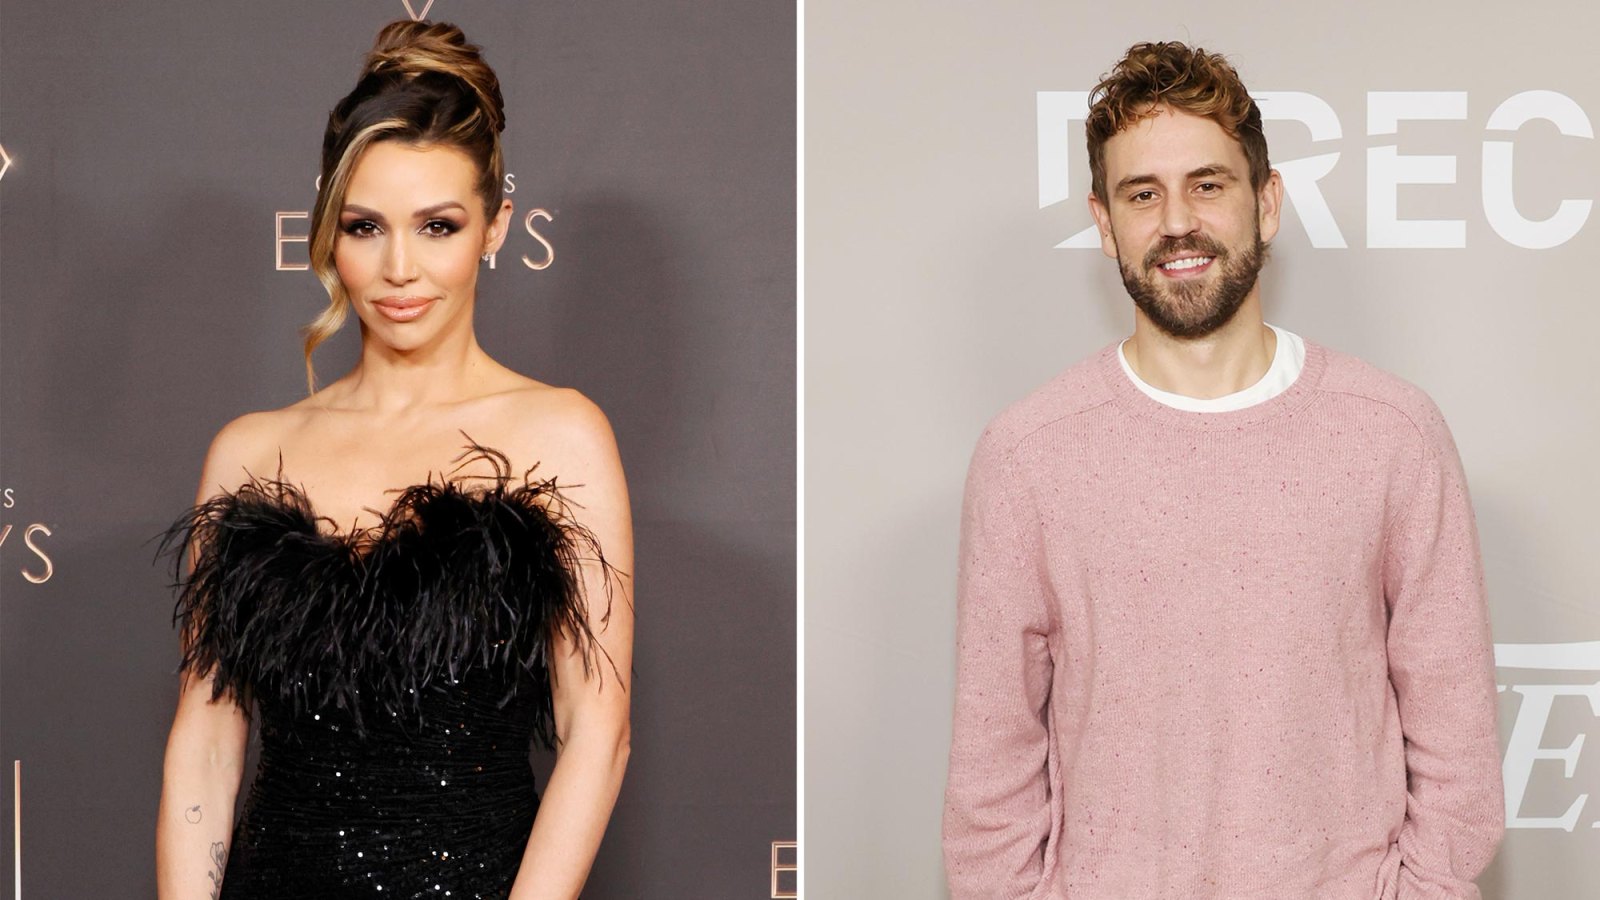 Scheana Shay Throws Shade at Nick Viall by Saying His Fiancee Is Literally on His Payroll